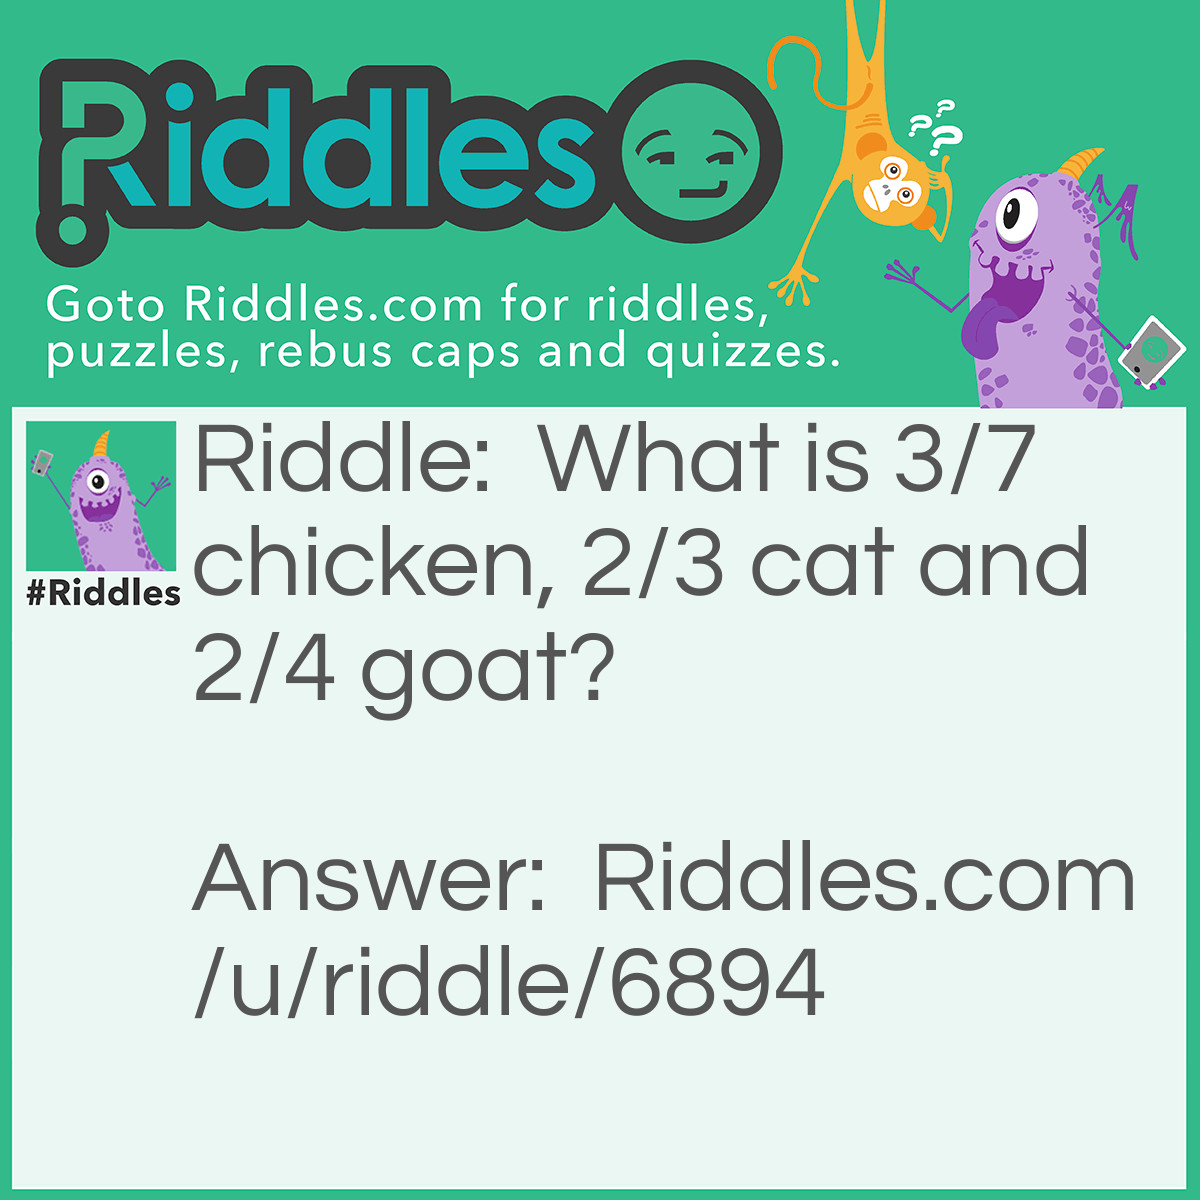 Riddle: What is 3/7 chicken, 2/3 cat and 2/4 goat? Answer: Chicago. 3 letters of 7 (chicken=chi), 2 letters of 3 (cat=ca), and 2 letters of 4 (goat=go).